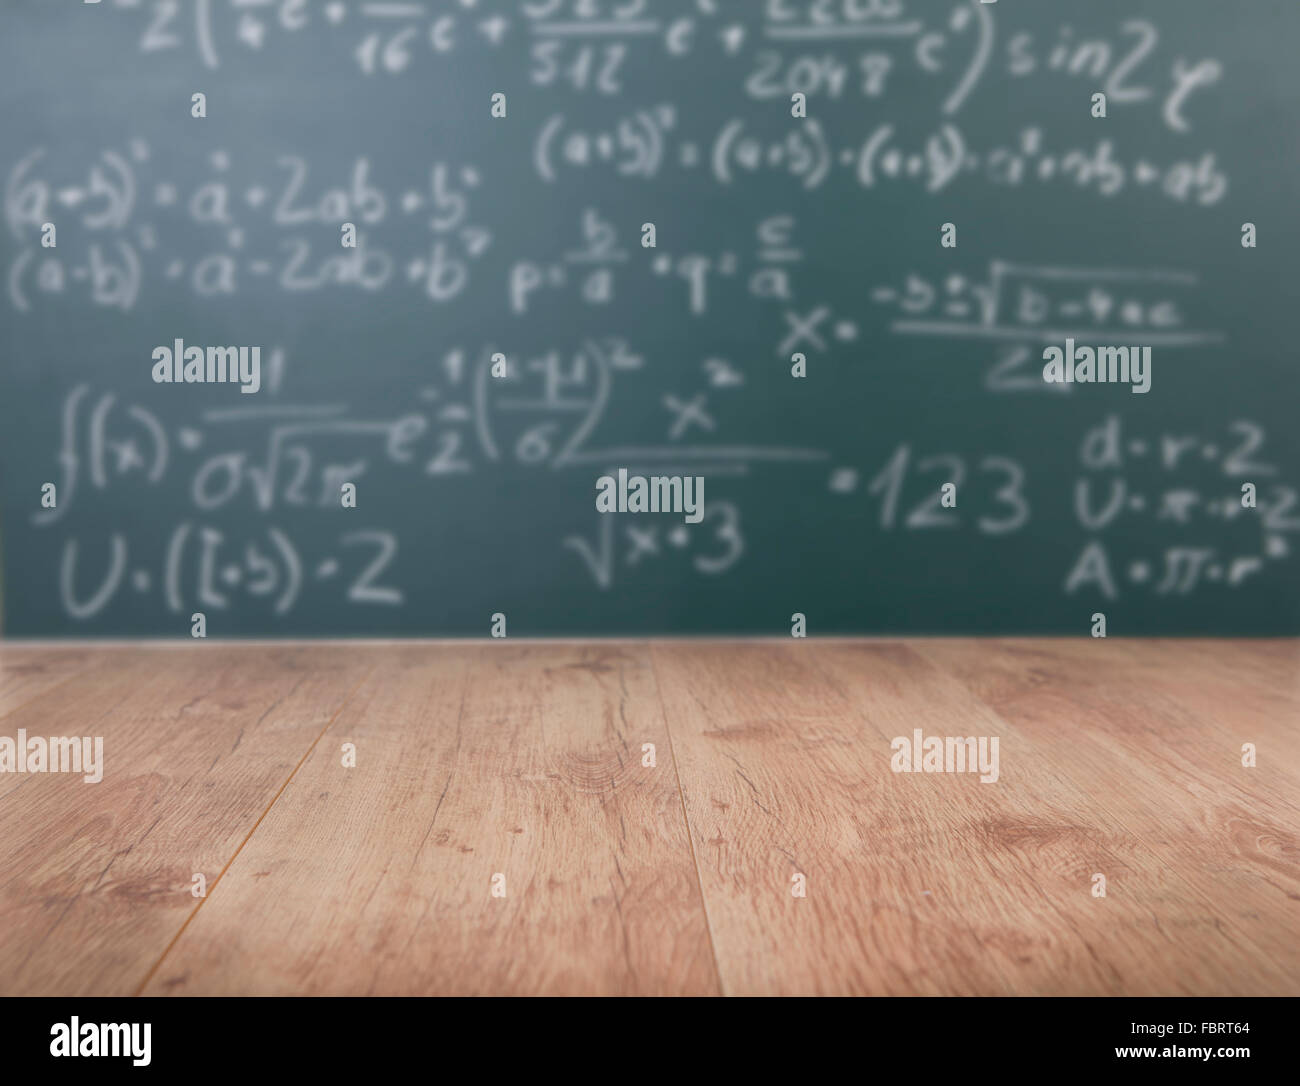 a wooden school desk in front of a green chalkboard with Mathematical formulas Stock Photo